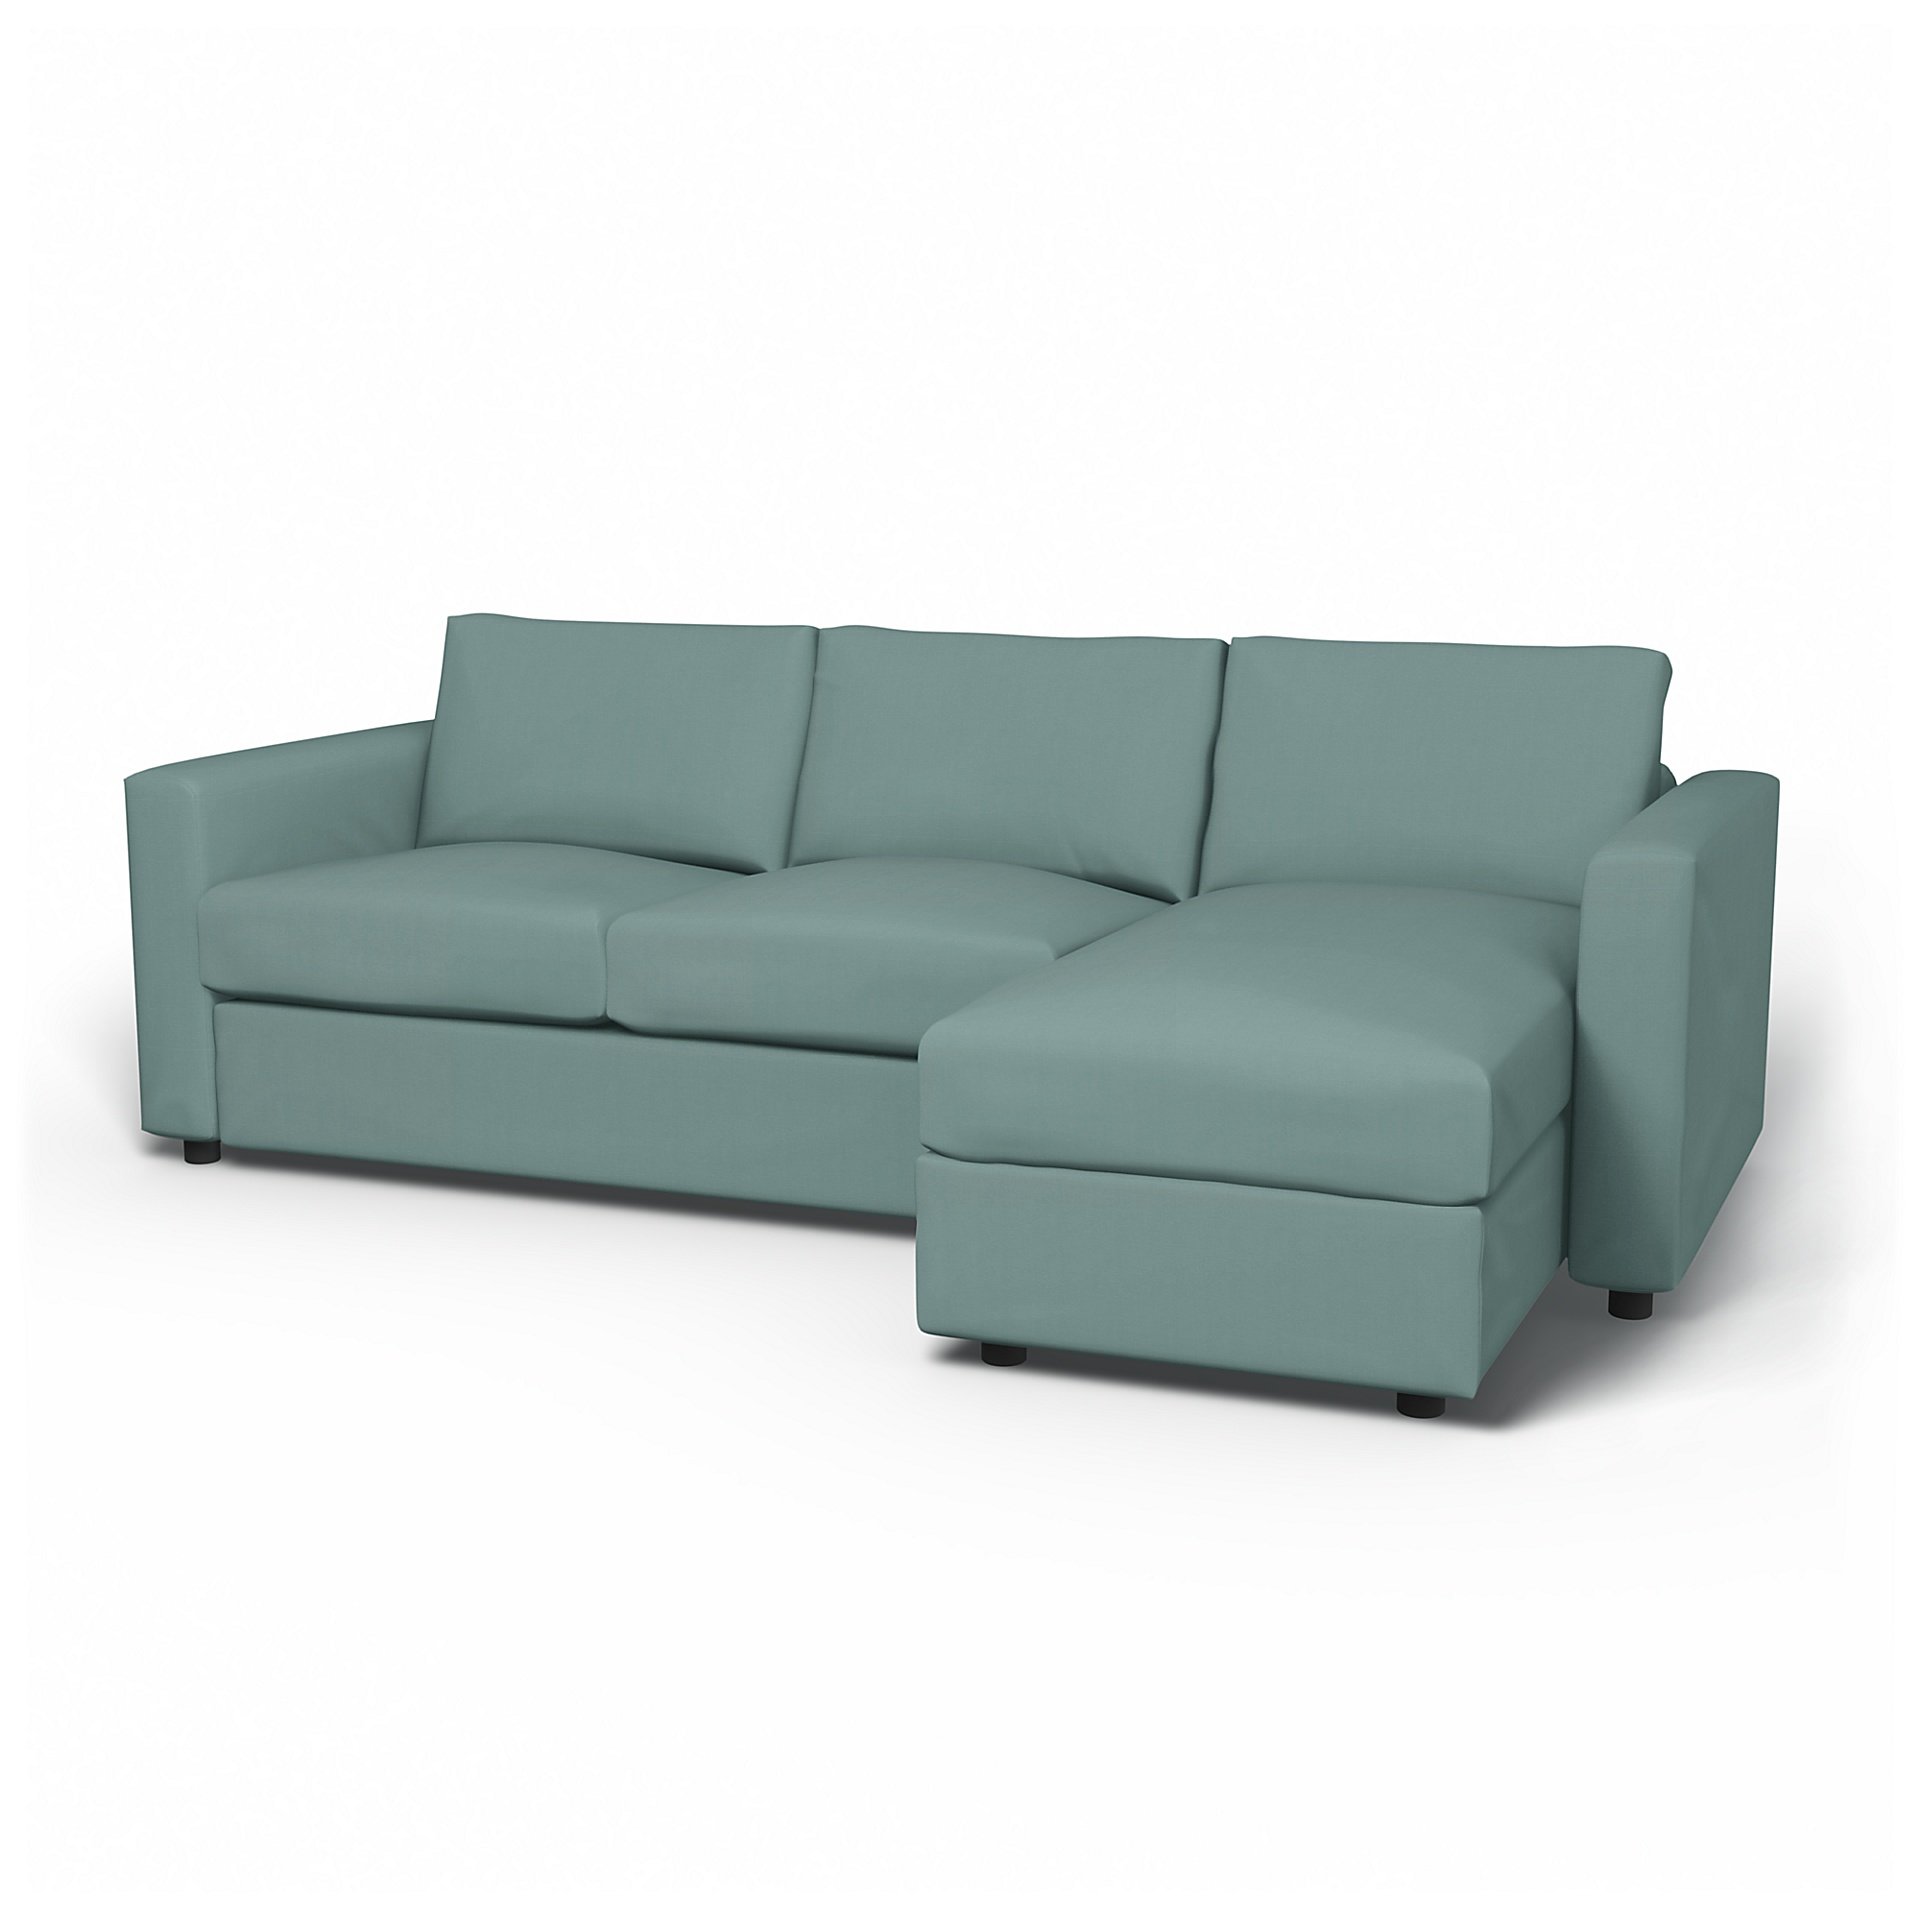 IKEA - Vimle 2 Seater Sofa with Chaise Cover, Mineral Blue, Cotton - Bemz